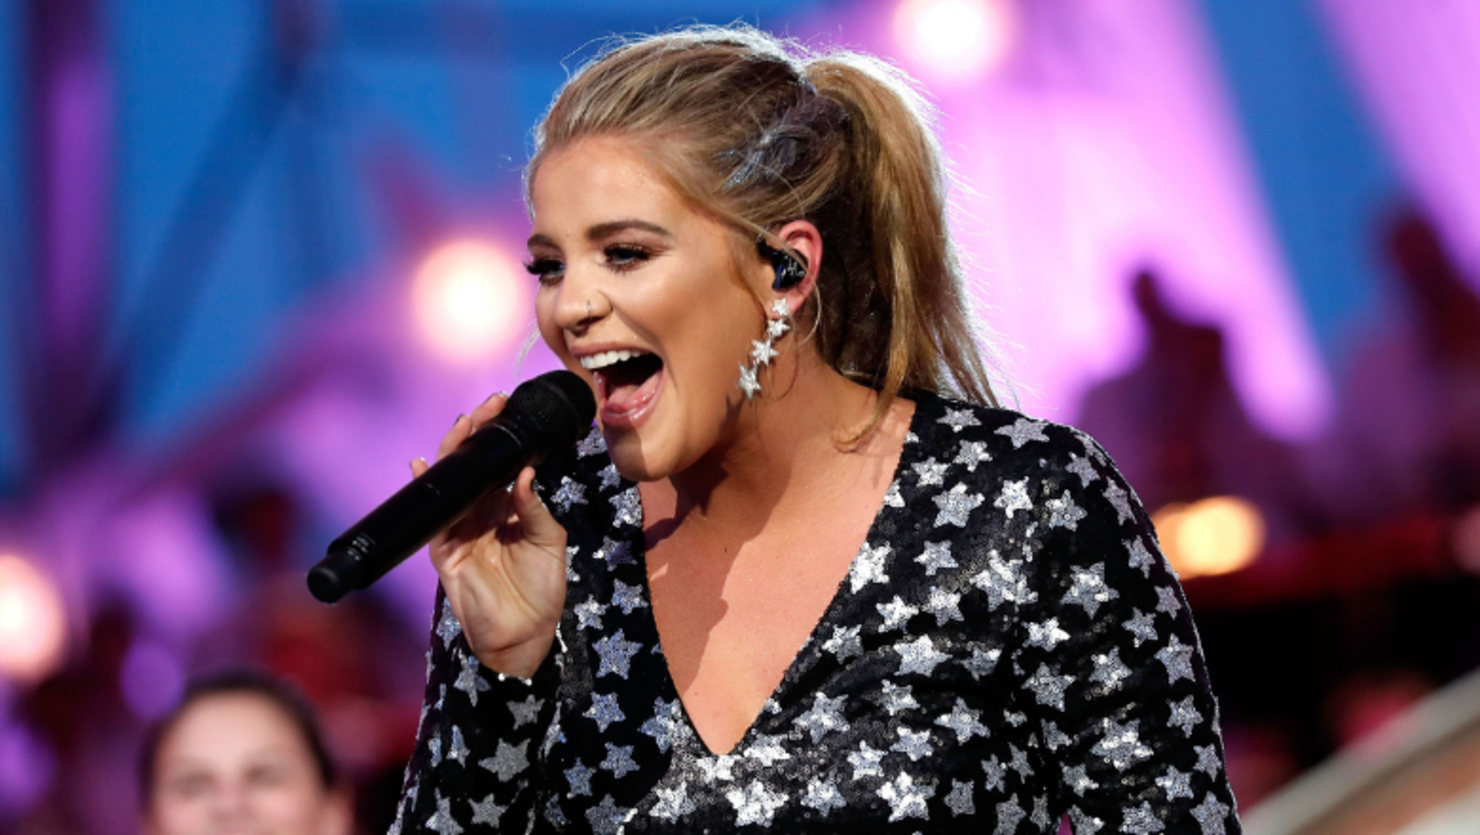 Lauren Alaina Introduces Her Adorable New Puppy Named Opry